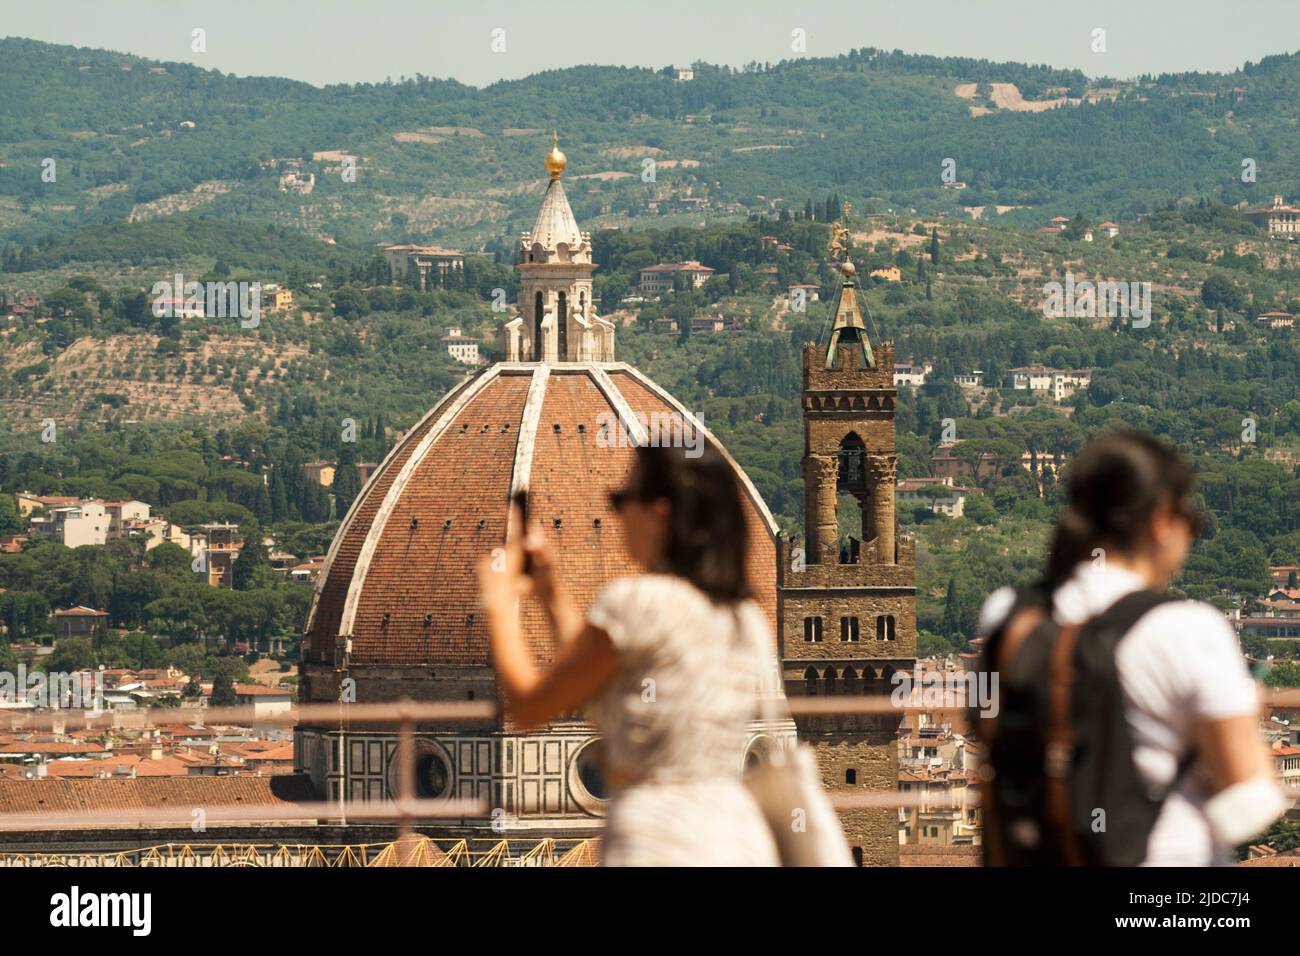 Italy, Tuscany, Florence, view from Belvedere fort. the cathedral. Stock Photo